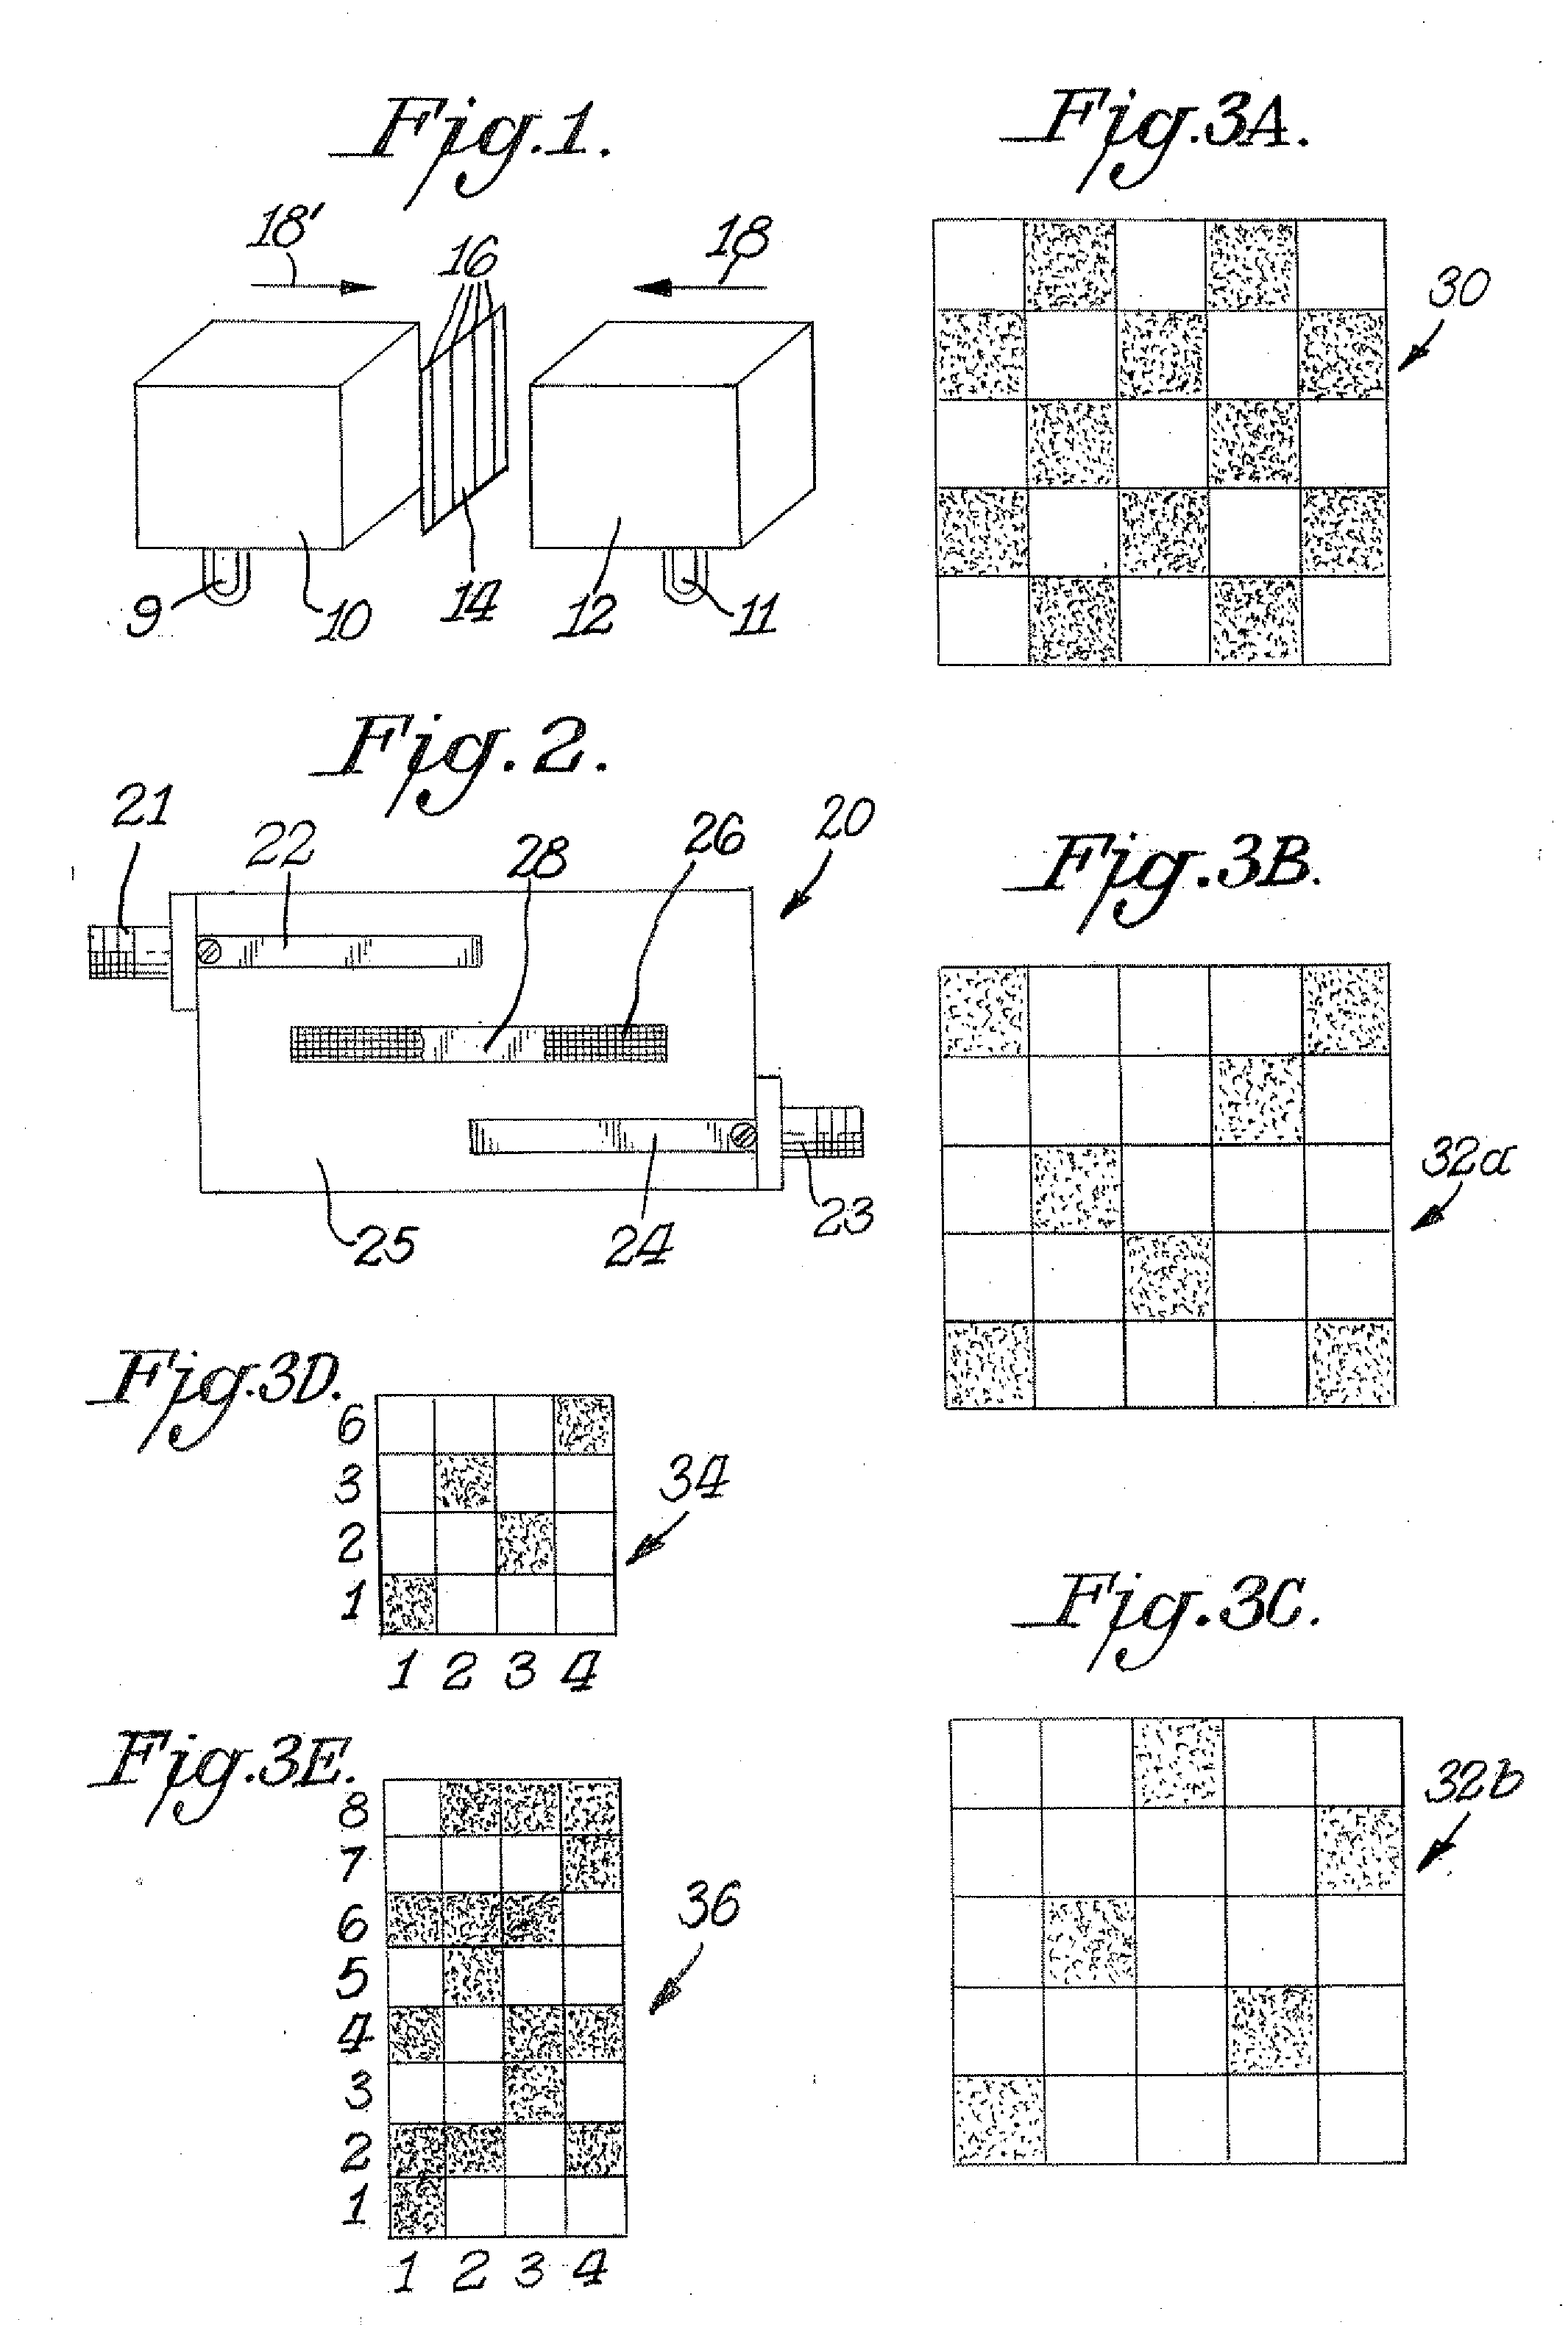 Surface functional electro-textile with functionality modulation capability, methods for making the same, and applications incorporating the same